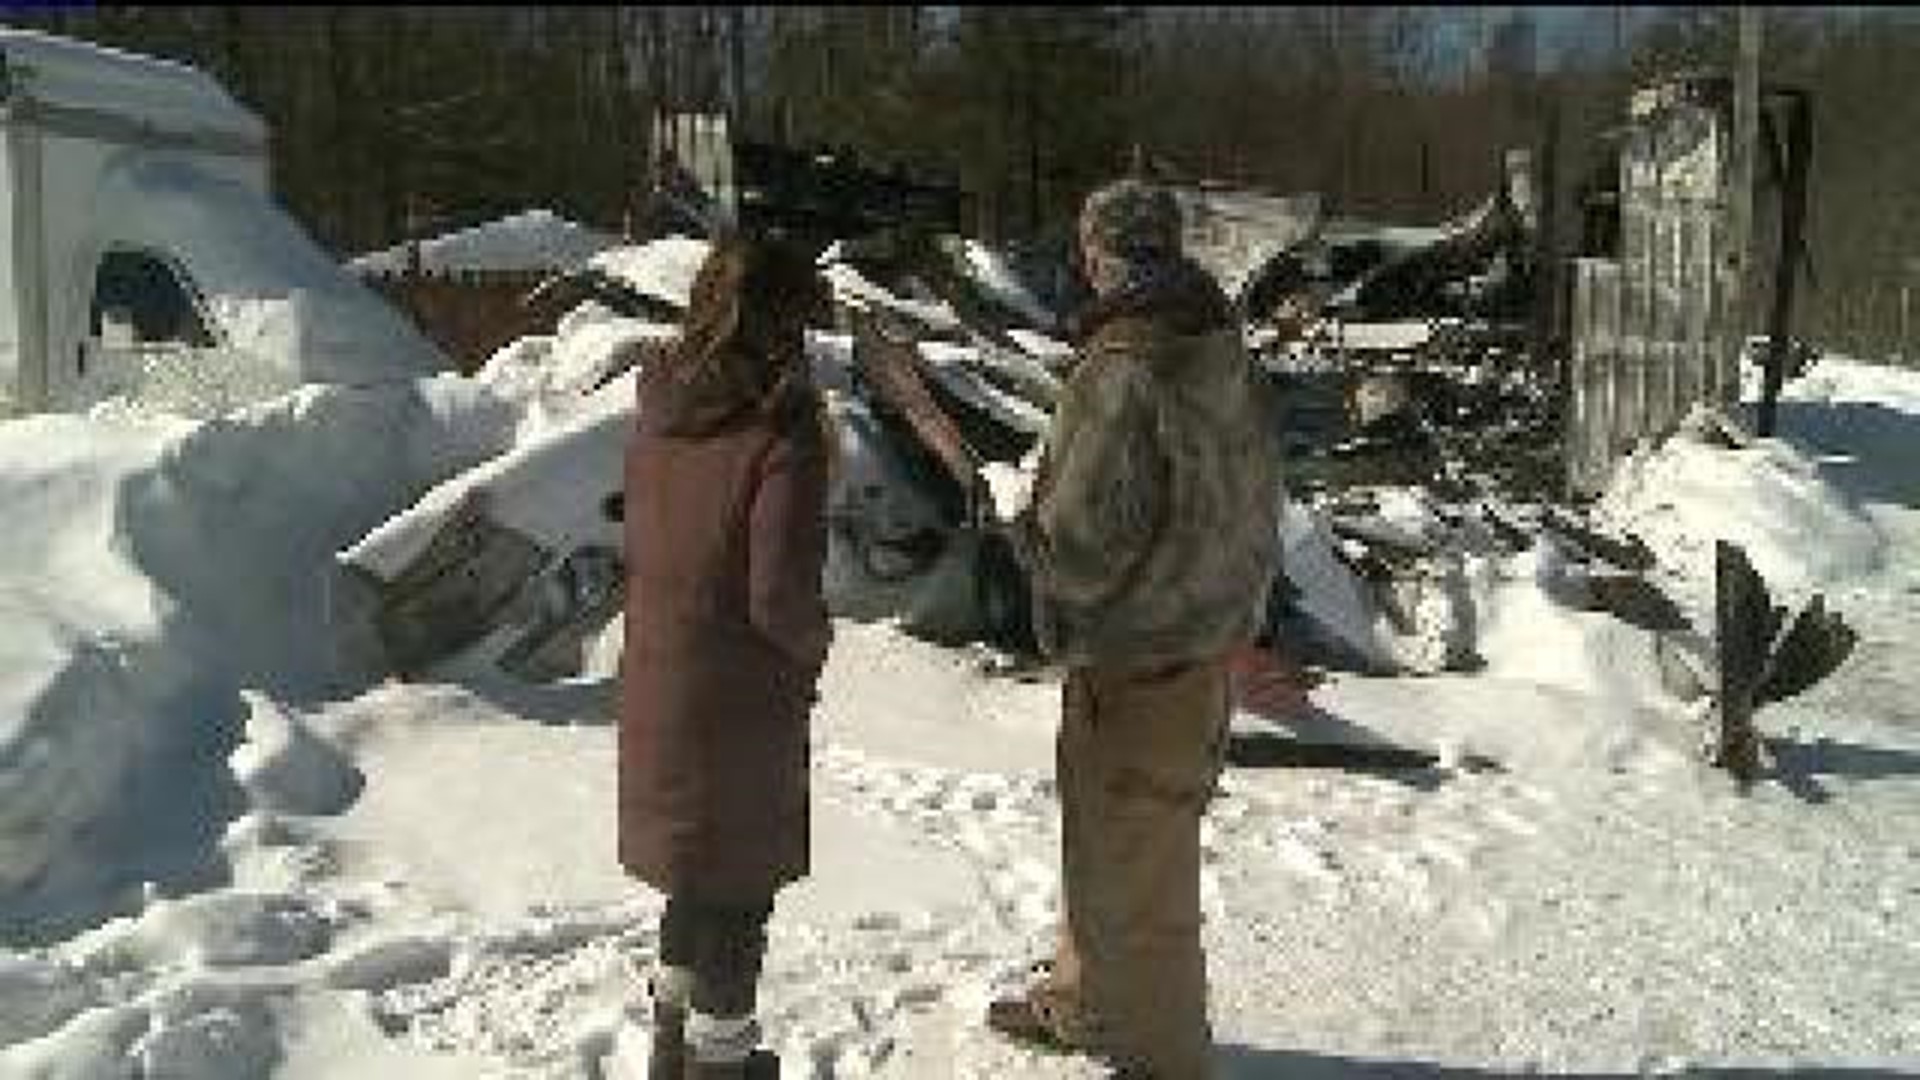 Fire Destroys Mountainhome Candle Warehouse